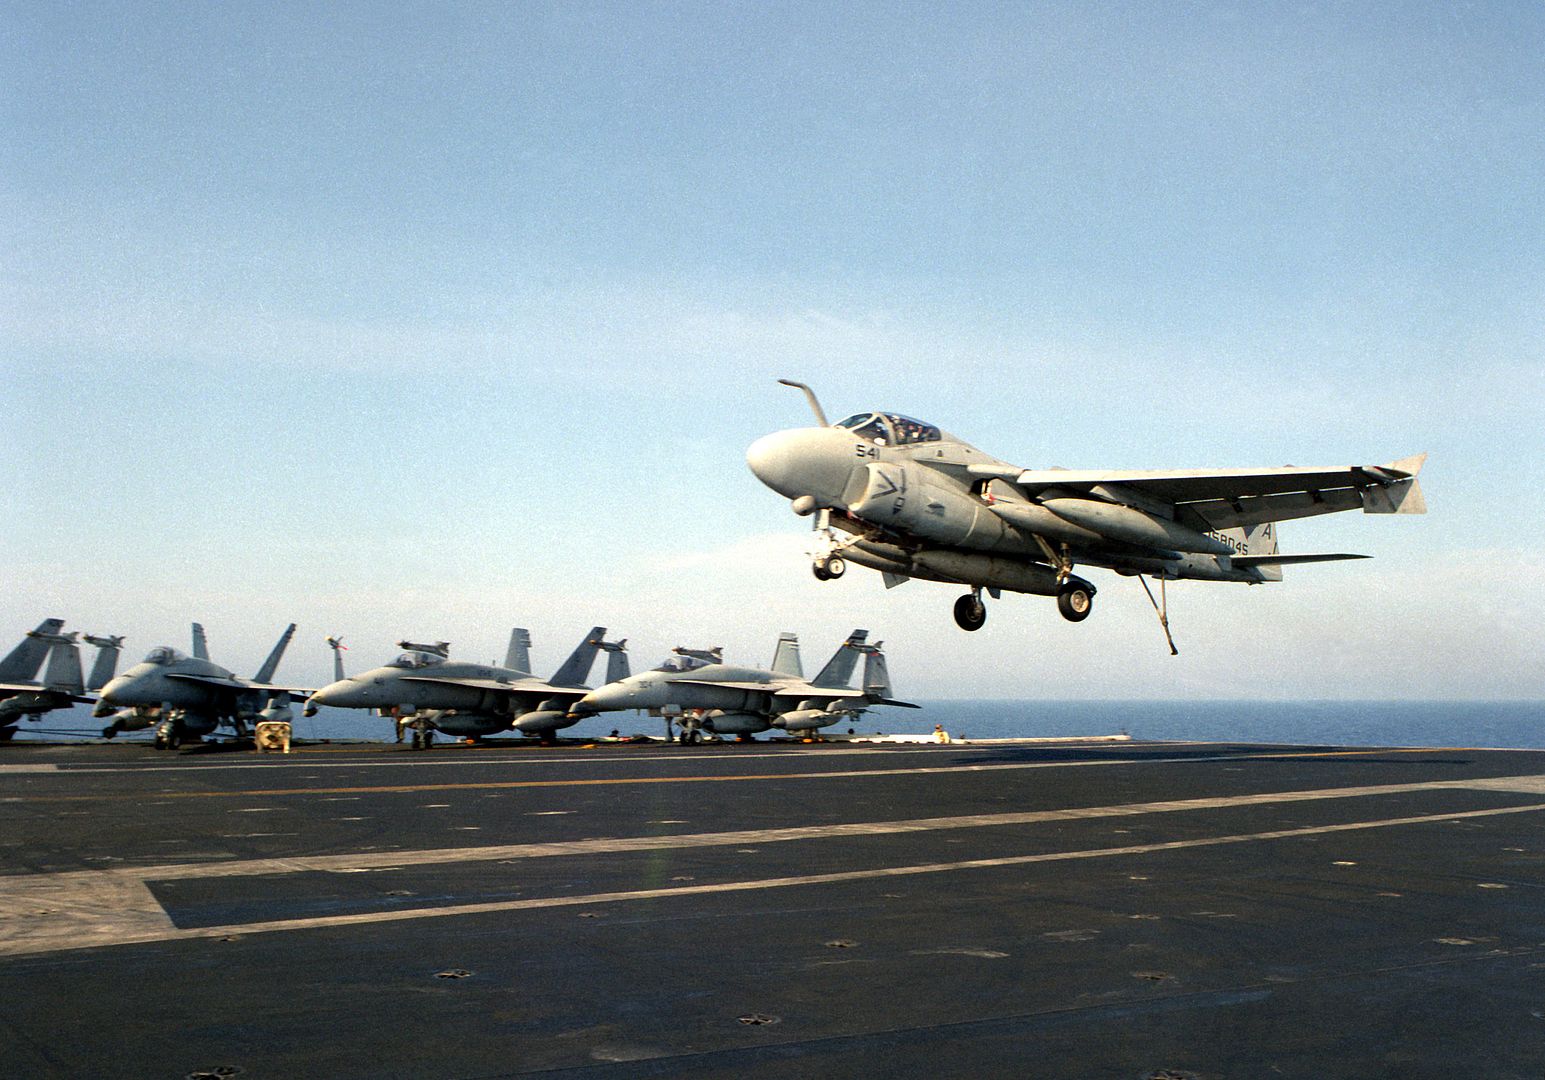 An Attack Squadron 36 A 6E Intruder Aircraft Comes In For An Arrested Landing On The Flight Deck Of The Nuclear Powered Aircraft Carrier USS THEODORE ROOSEVELT